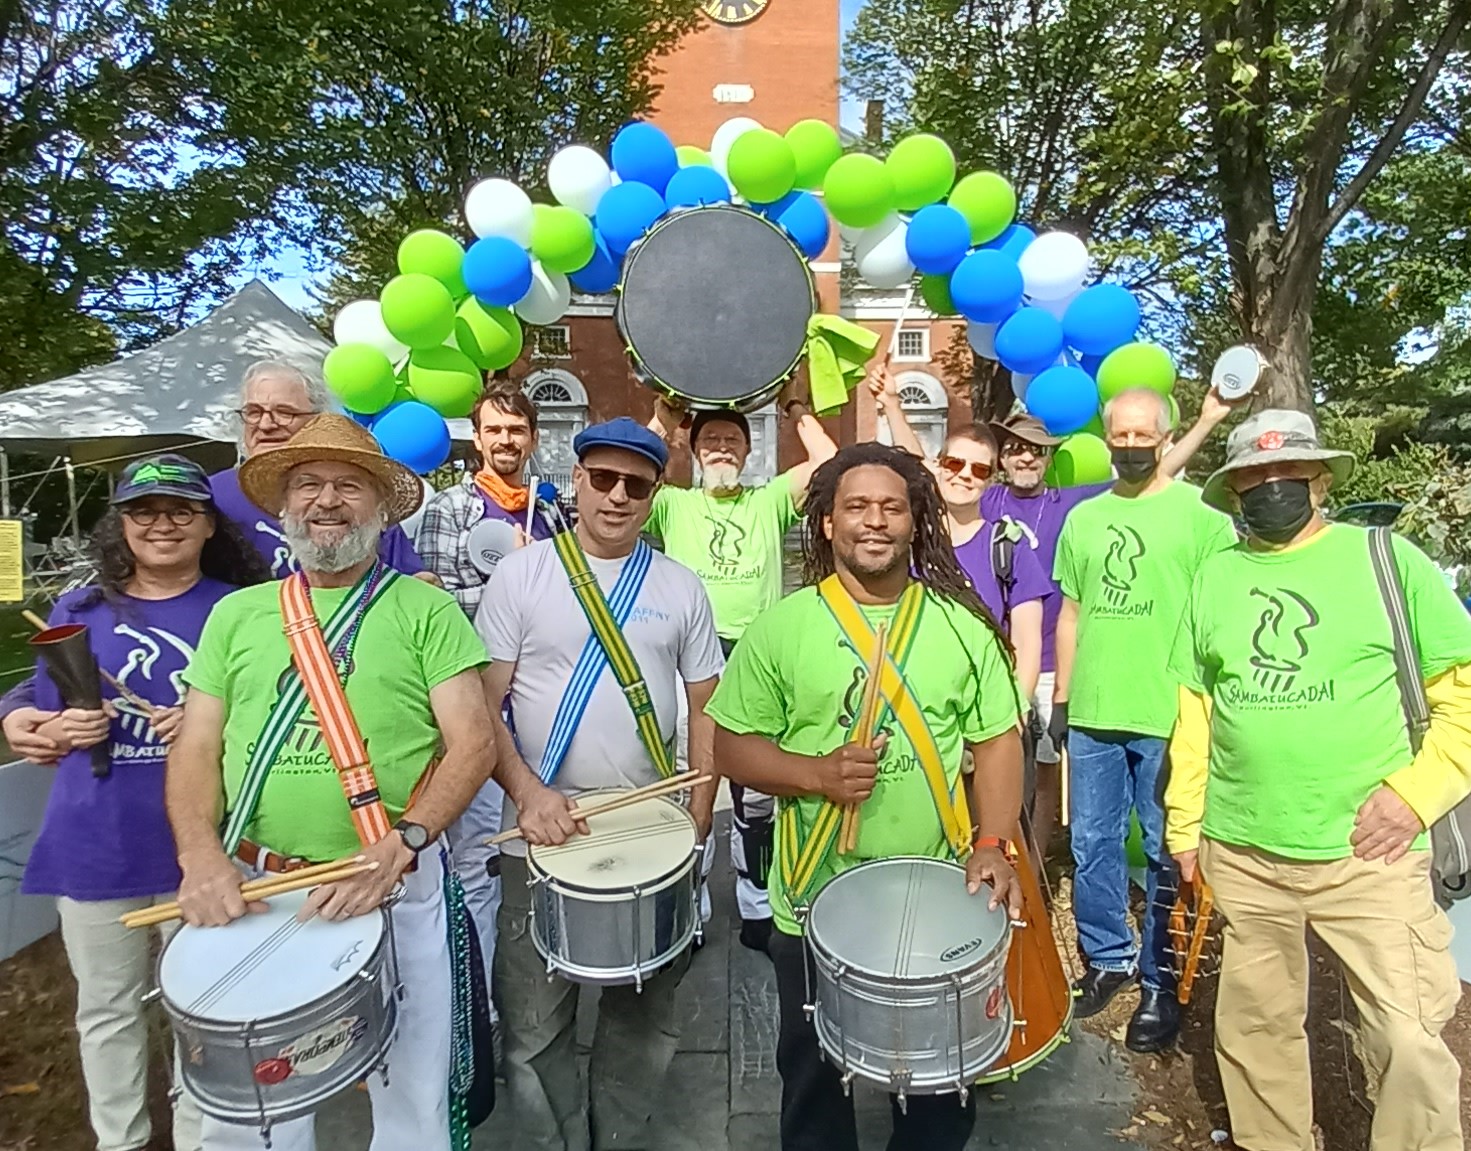 group of adults with drums stand in front of a green and blue balloon arch